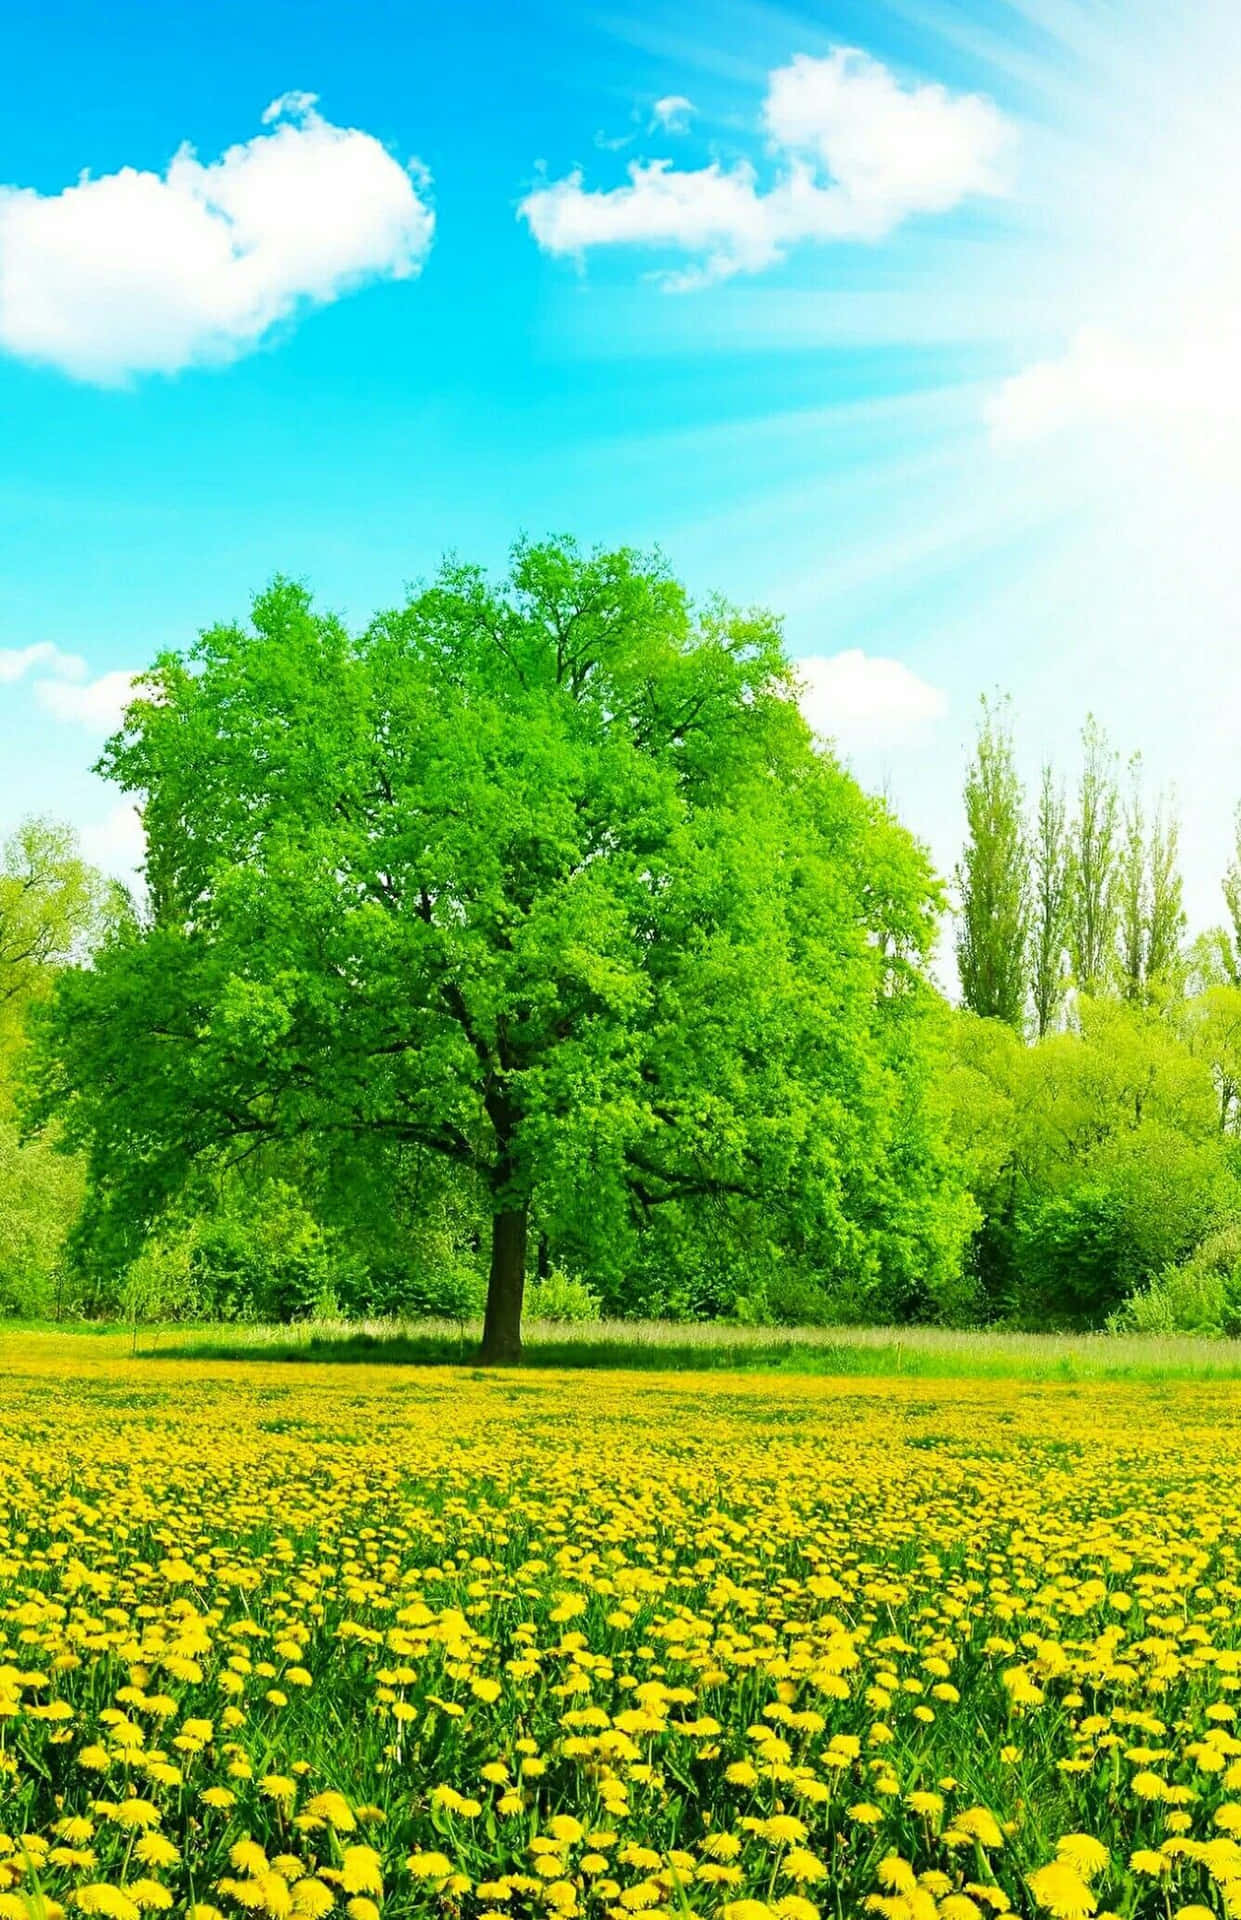 Environment Tree On Field Of Yellow Flowers Wallpaper